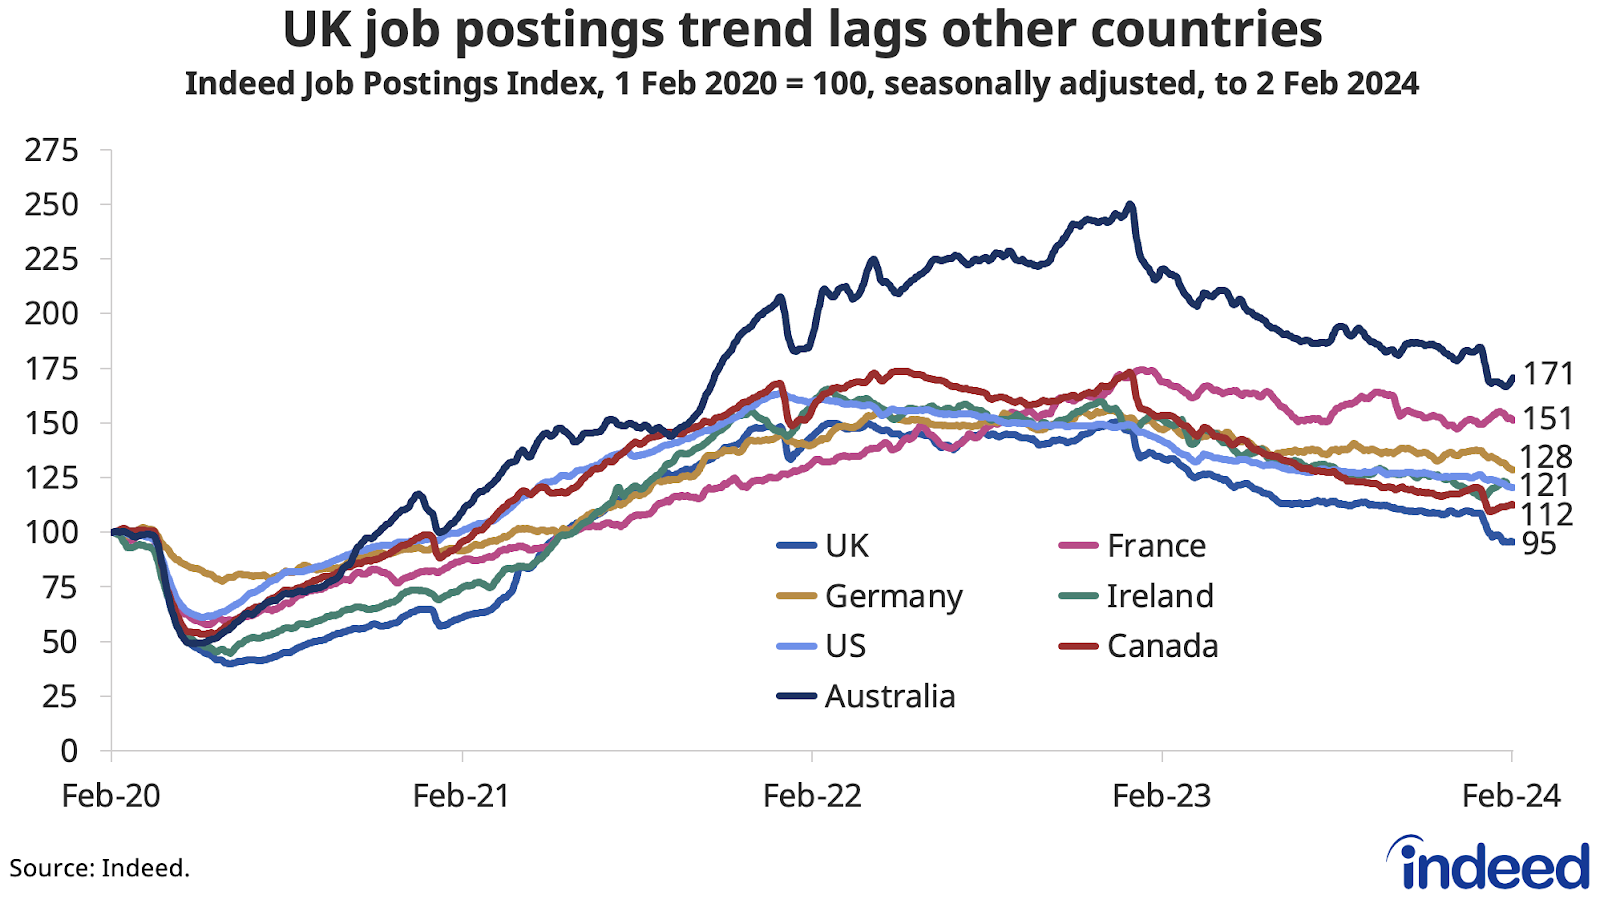 Line chart titled “UK job postings trend lags other countries” shows the trend in job postings across countries from 1 February 2020 to 2 February 2024. The UK is the only country in the chart where job postings are now below pre-pandemic levels. 